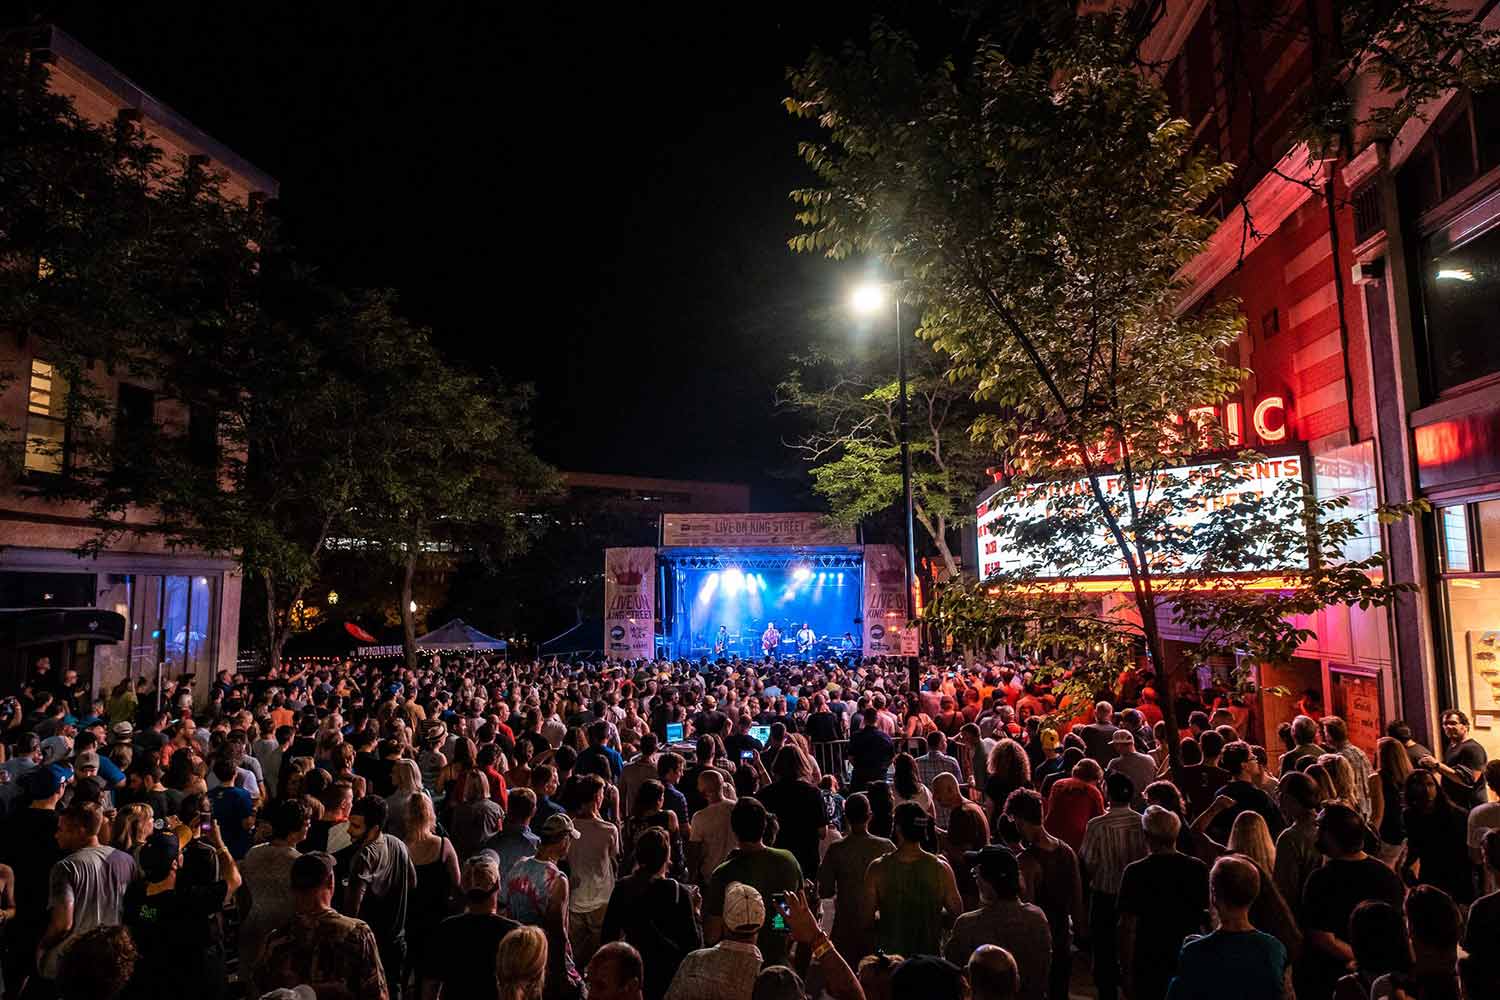 Here’s the 2019 Live on King Street lineup The Bozho